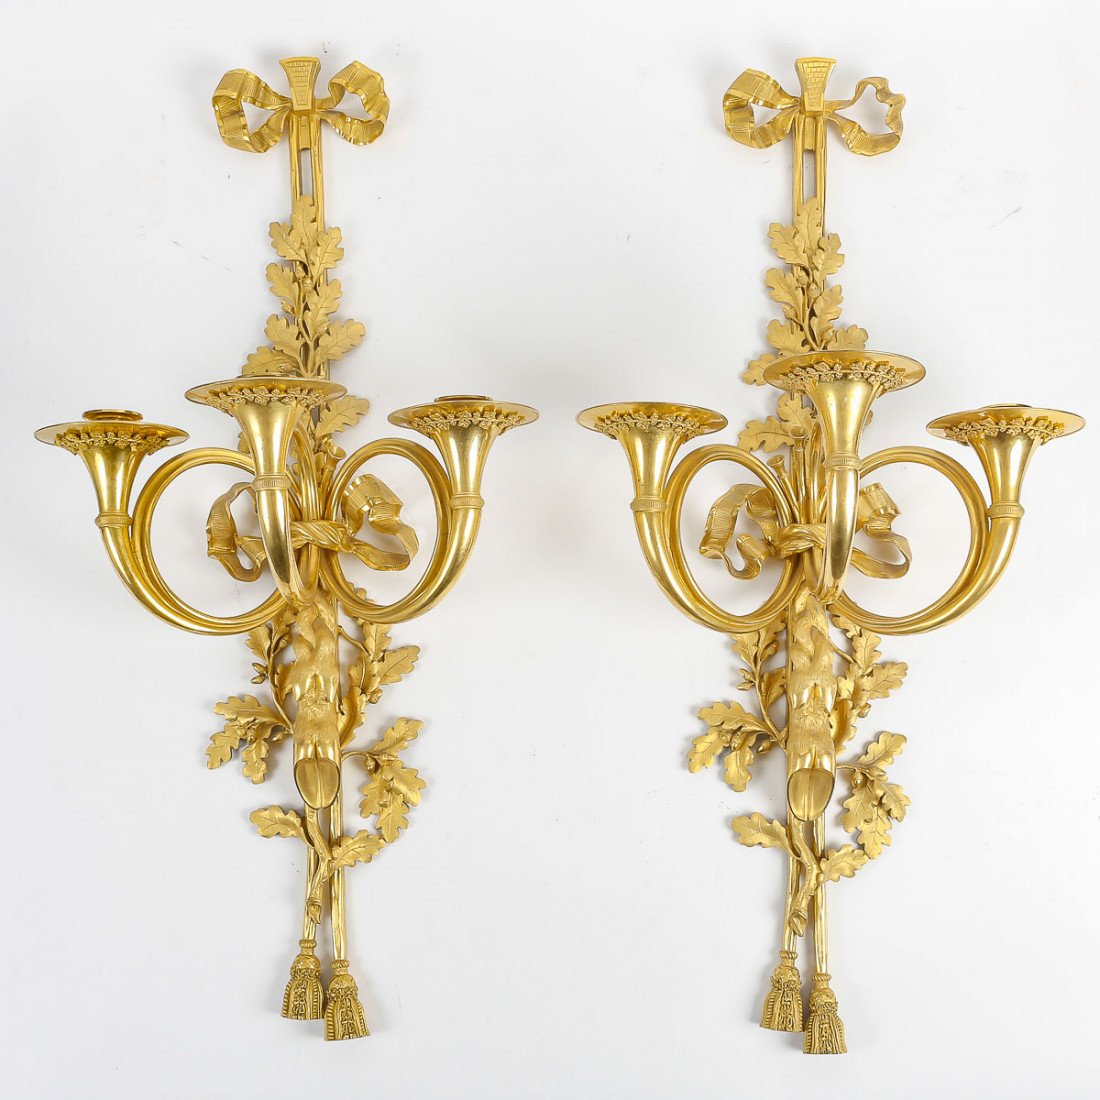 A Pair Of Important Wall - Lights In Louis XVI Style.